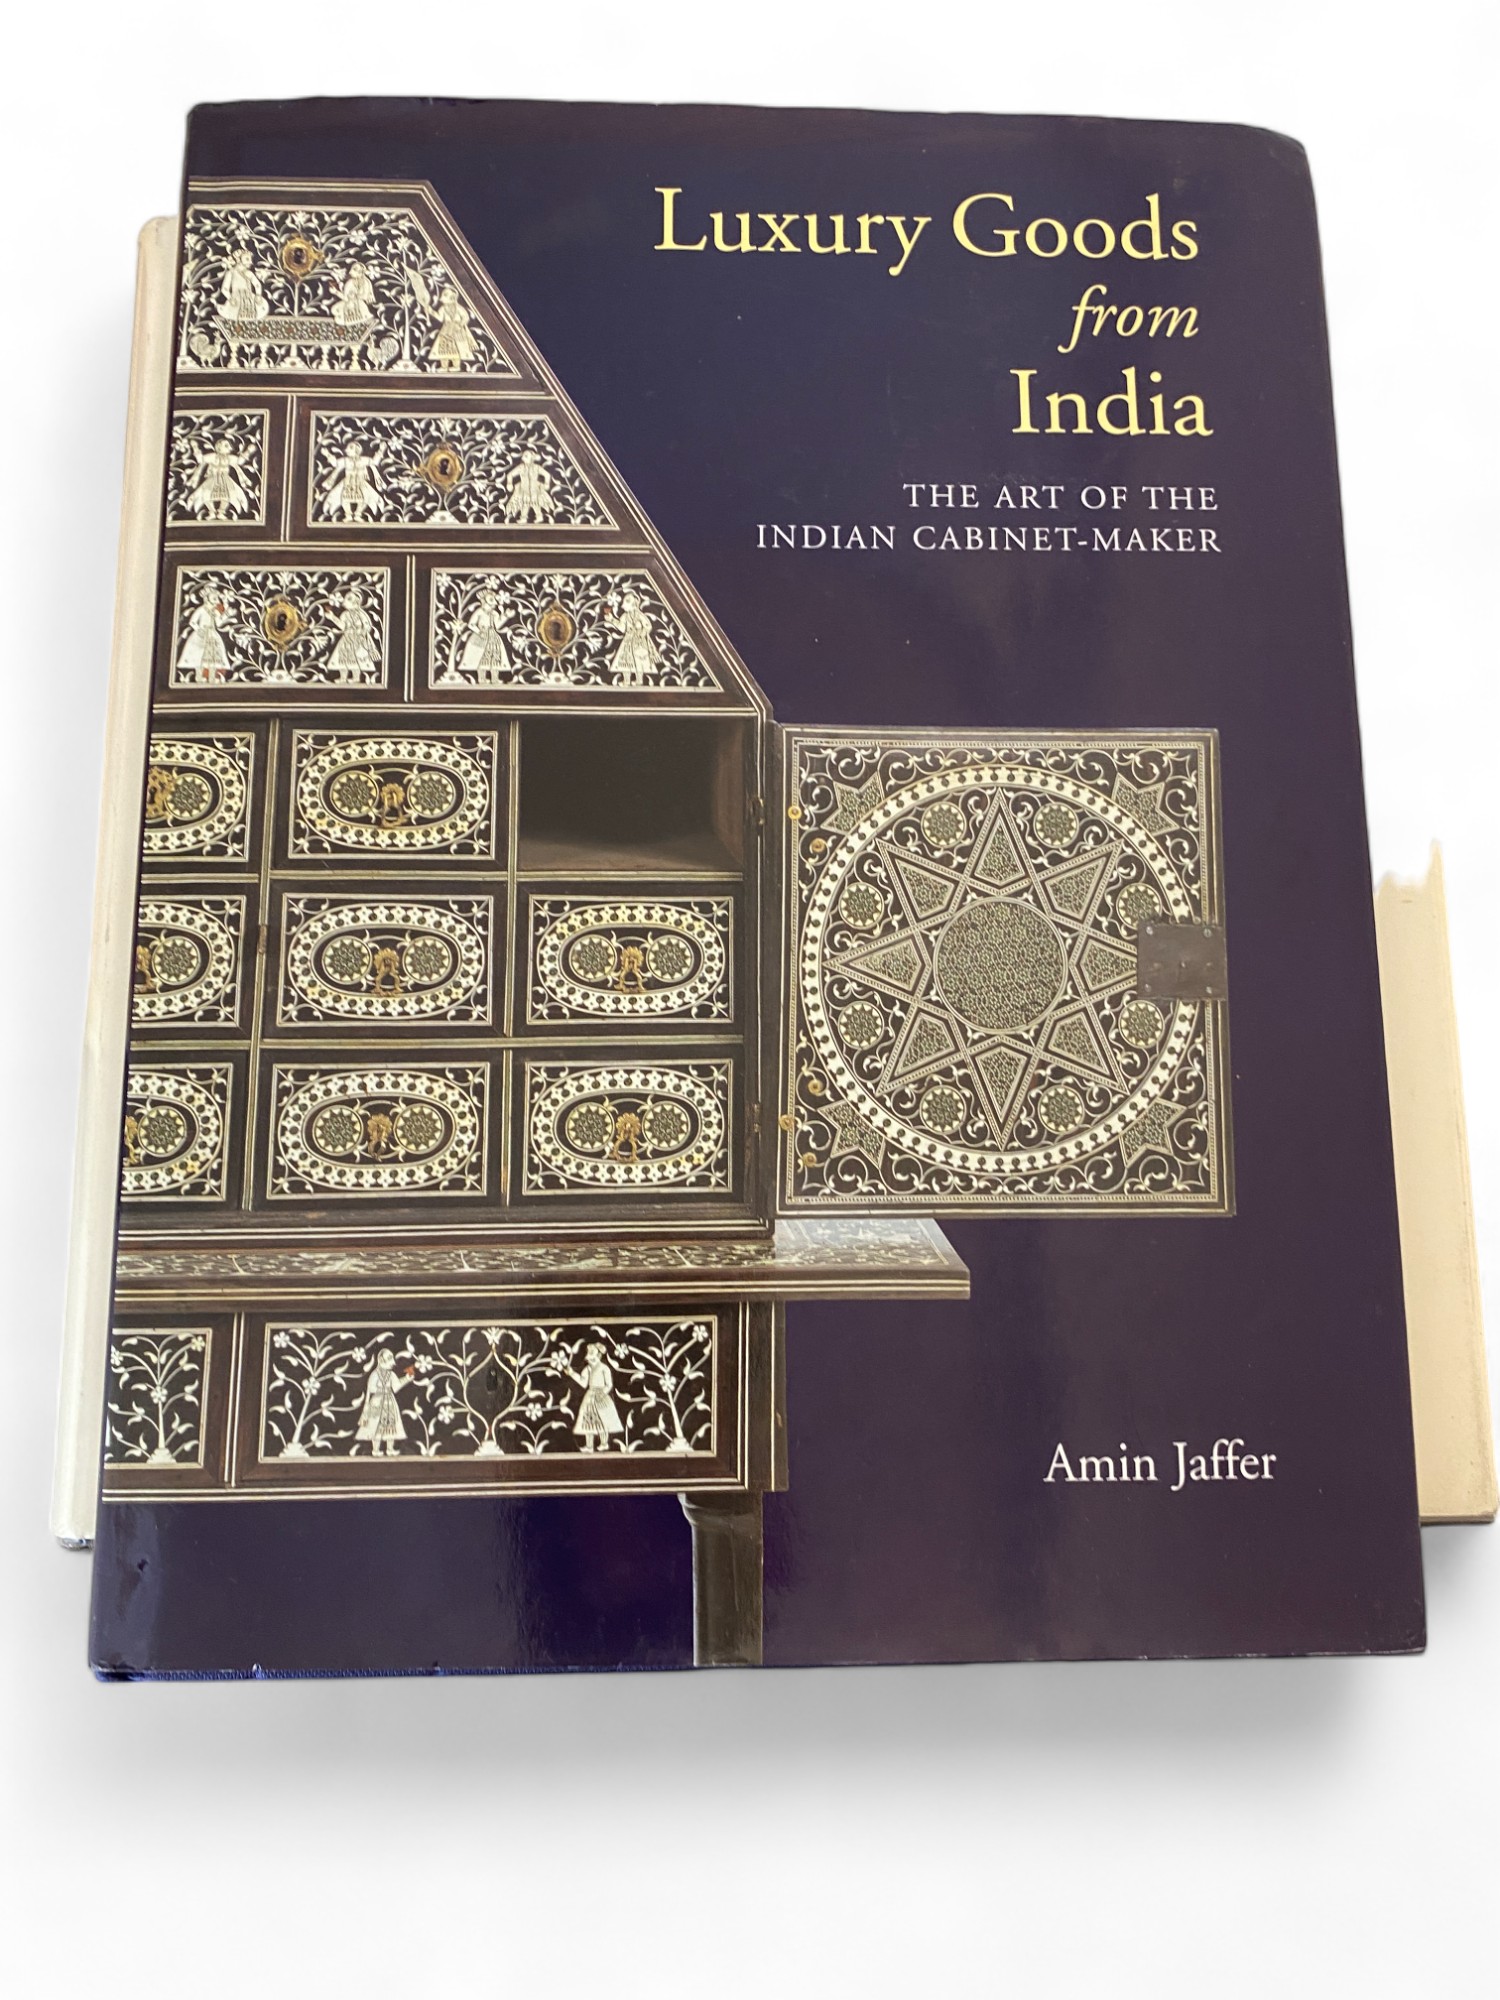 Art Reference Books on Asian Art - Indian - Image 4 of 9